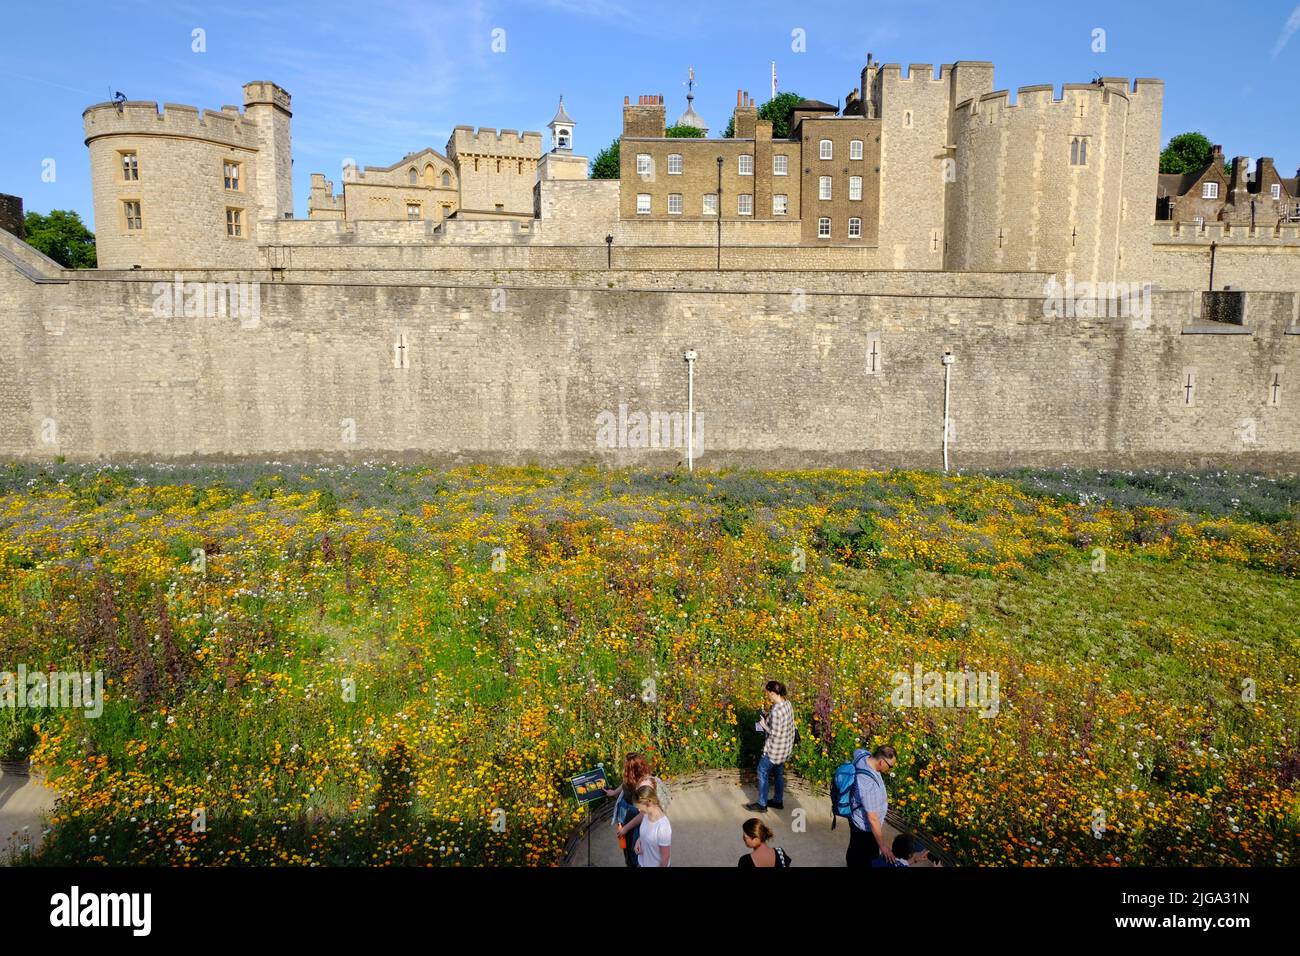 London, UK. 8th July, 2022. Visitors enjoy the beautiful 'Superbloom' floral display as the recent hot and sunny weather has enabled the initially struggling plants to flourish in the Tower of London's moat. Over 20 million seeds were sown to mark the Queen's Platinum Jubilee from a variety of flowering plants, to encourage pollinating insects, with some selected as inspired by the monarch's crown. The displays will evolve through the months, when visitors can expect to see different a range of flowers throughout summer, heading towards autumn. Credit: Eleventh Hour Photography/Alamy Live New Stock Photo